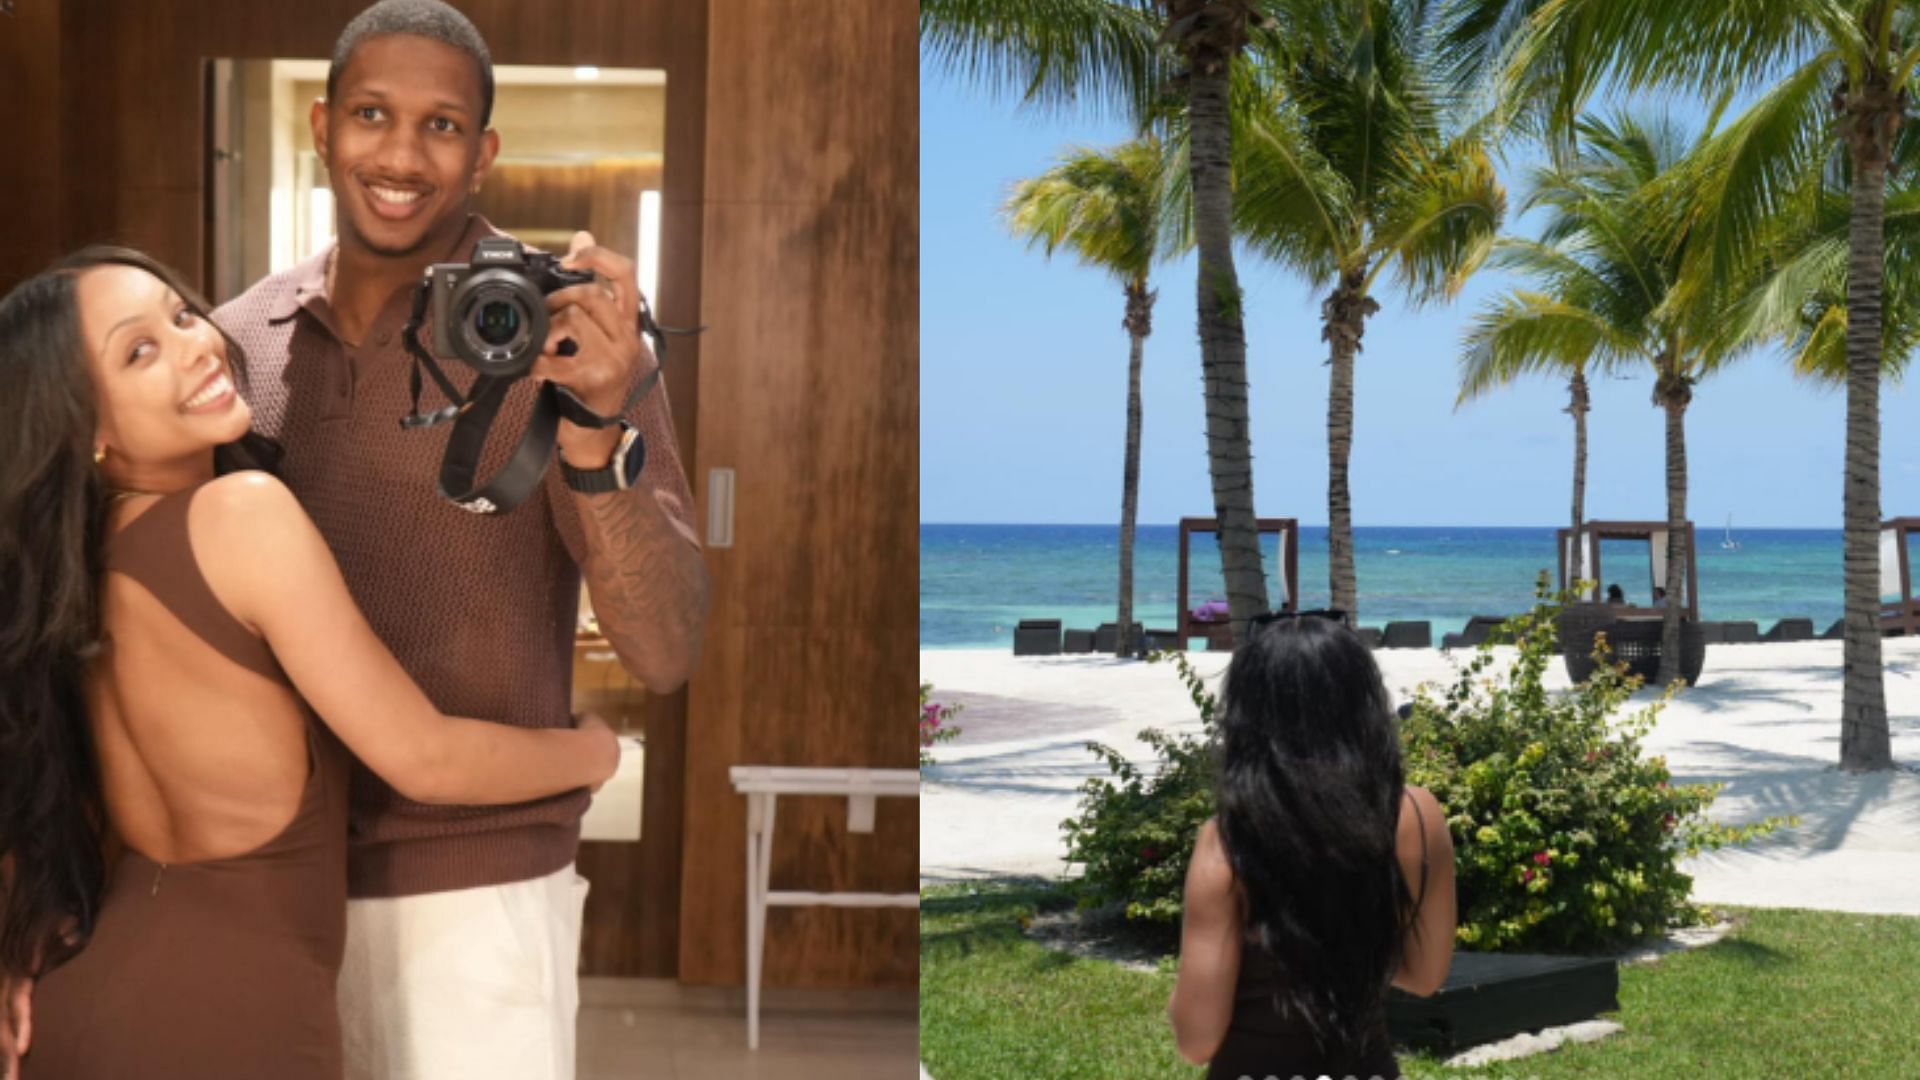 Michael Penix Jr. and his girlfriend Olivia Carter took a vacation to Jamaica.